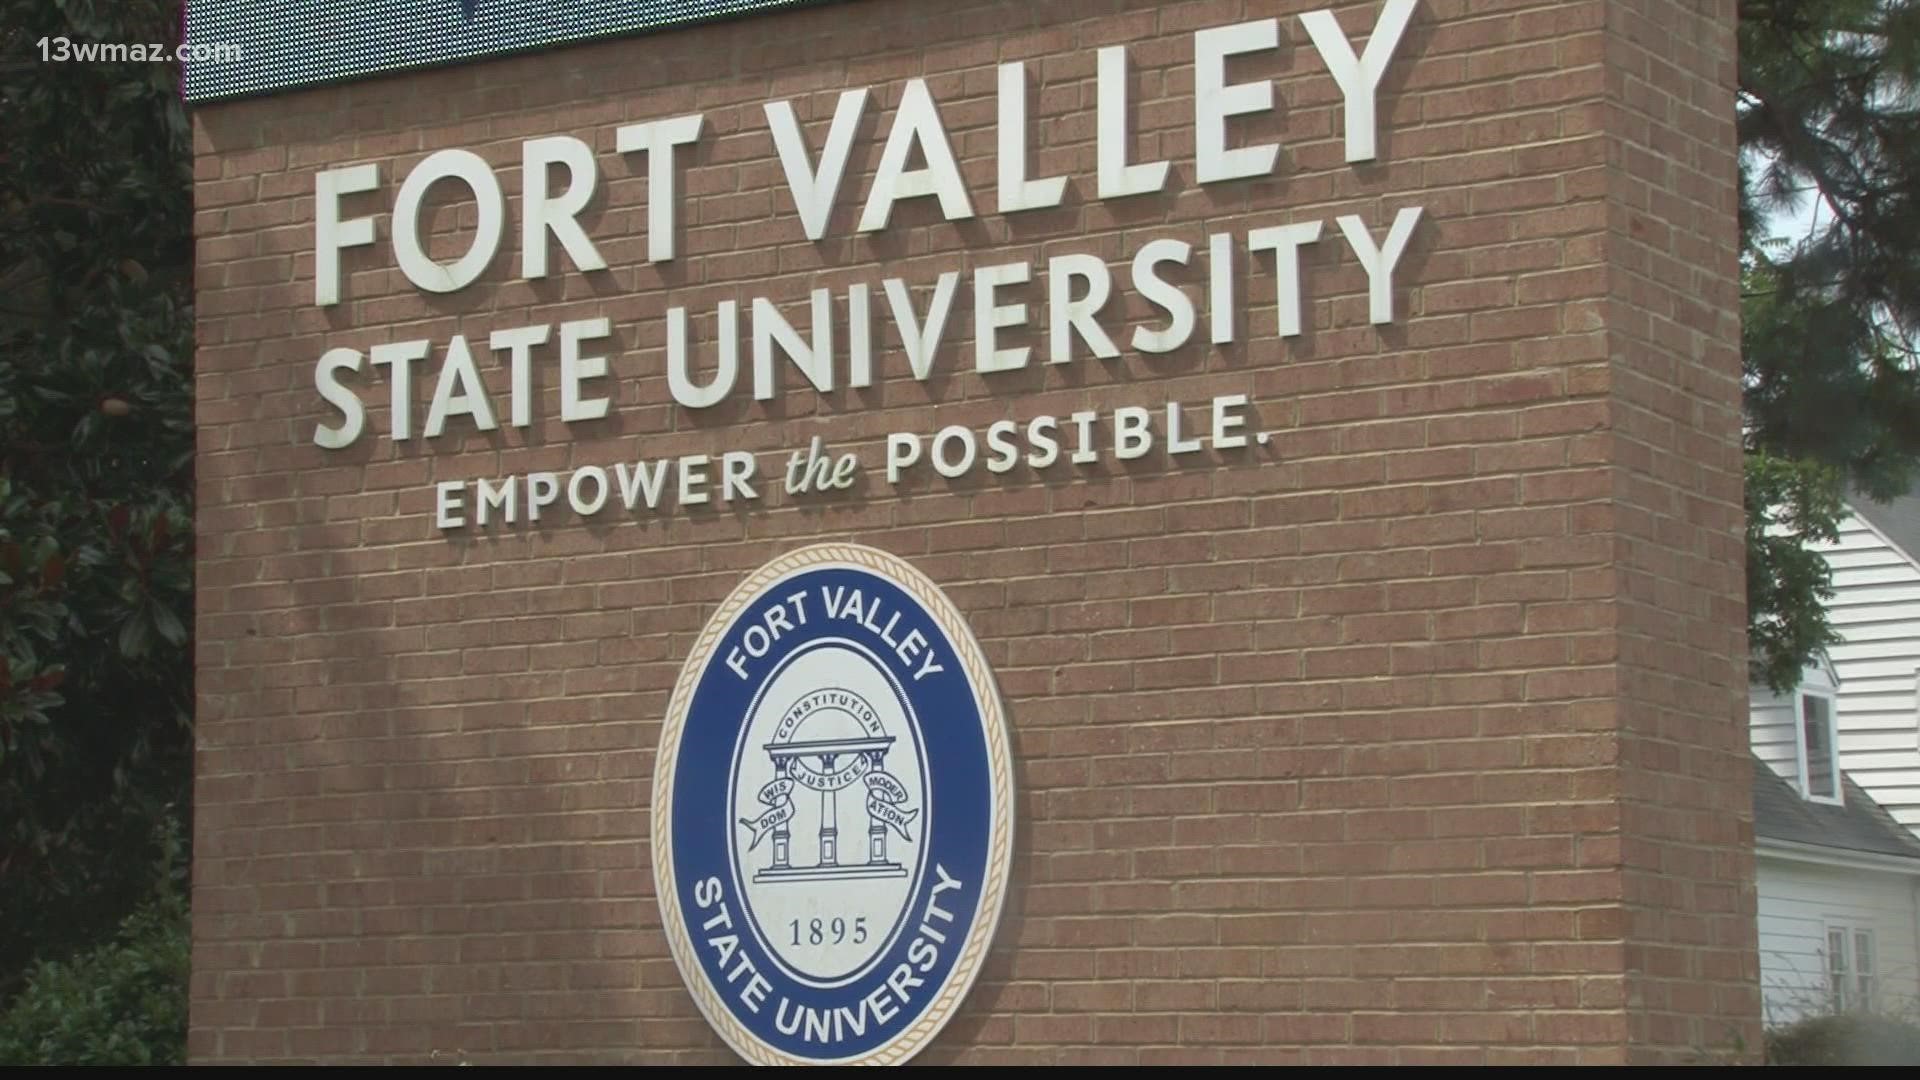 Fort Valley State University joins the list of HBCUs that have wiped student balances clean.